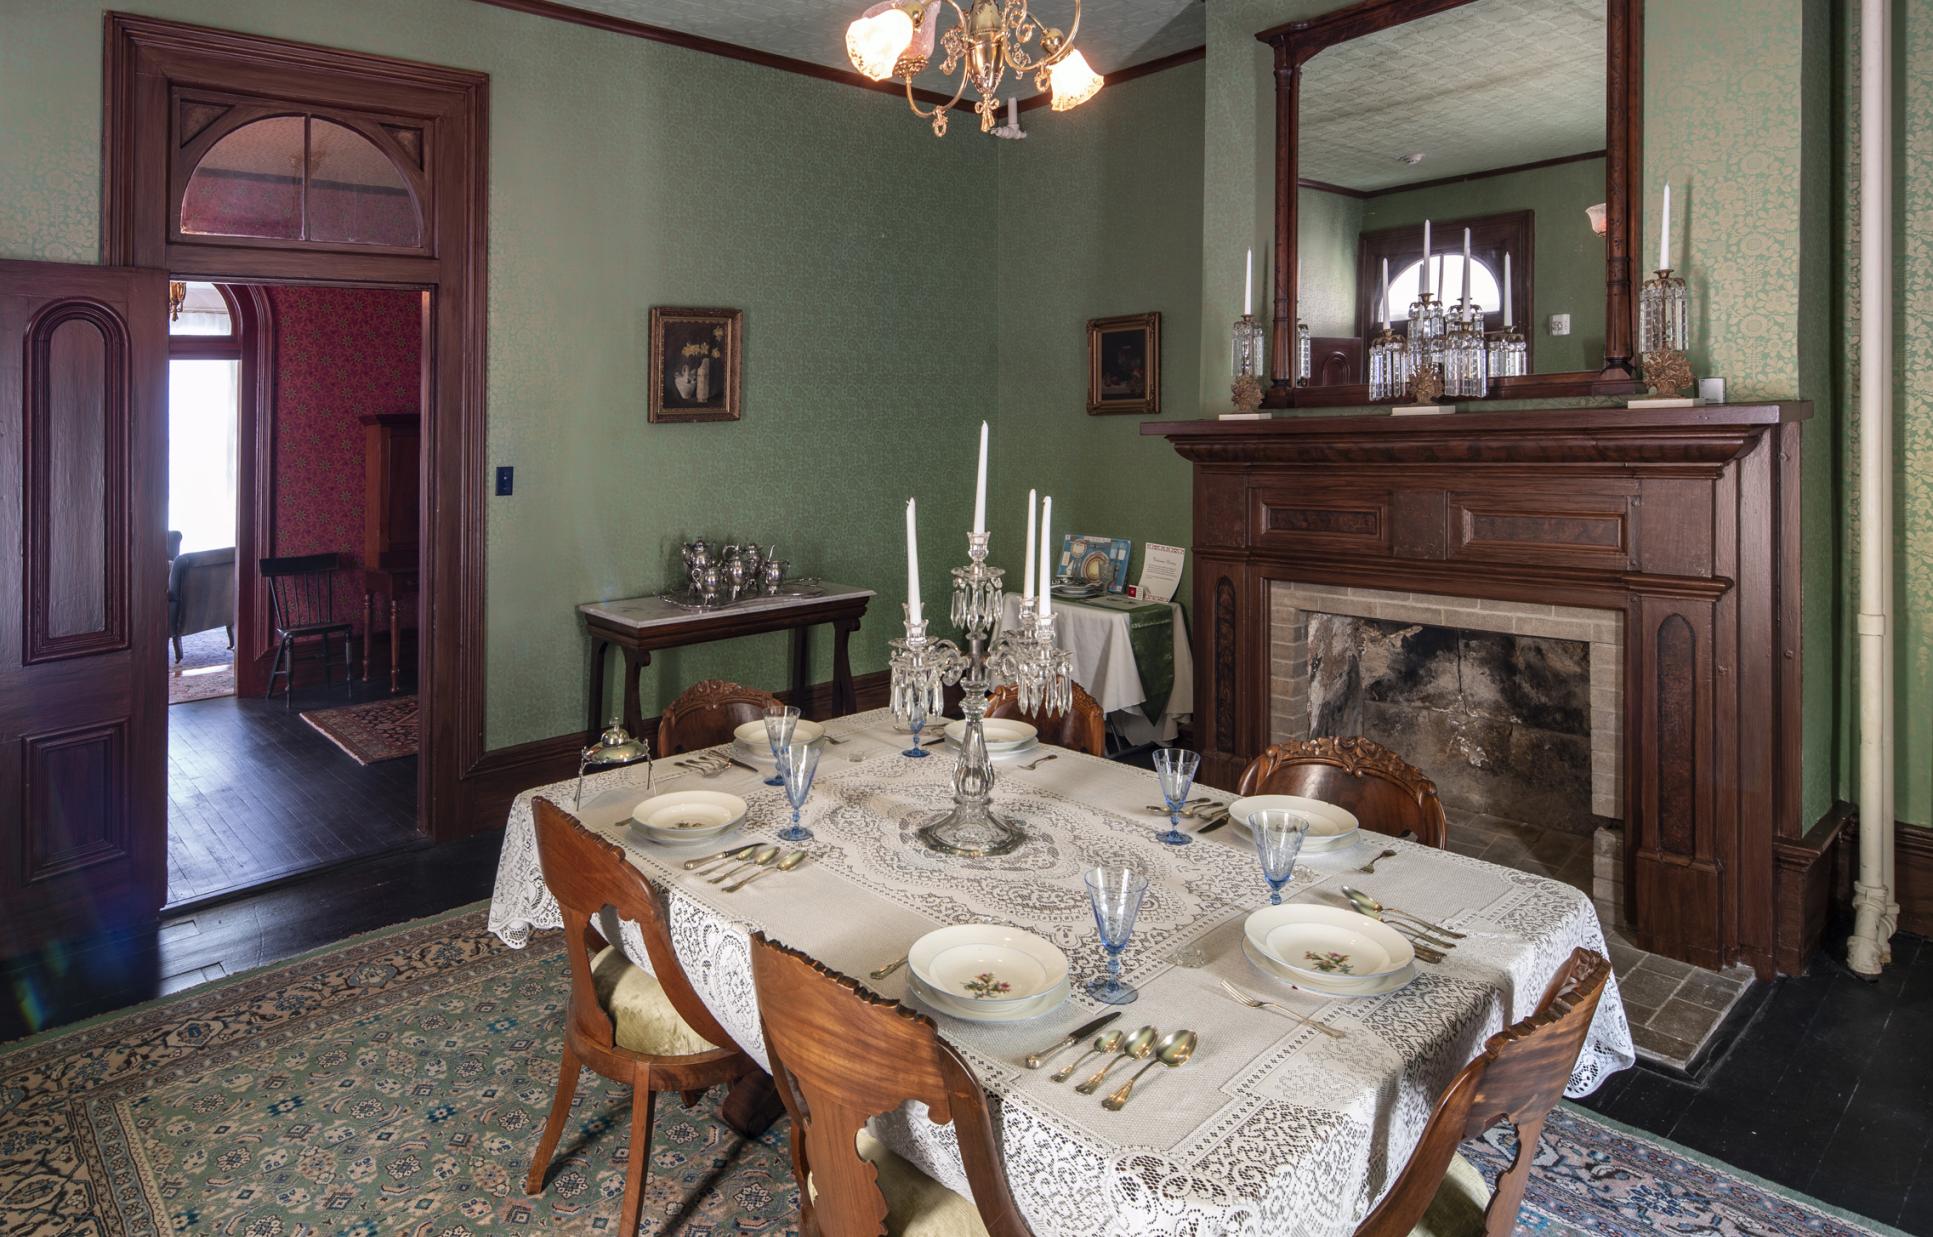 Dining room inside the Sam Bell Maxey House